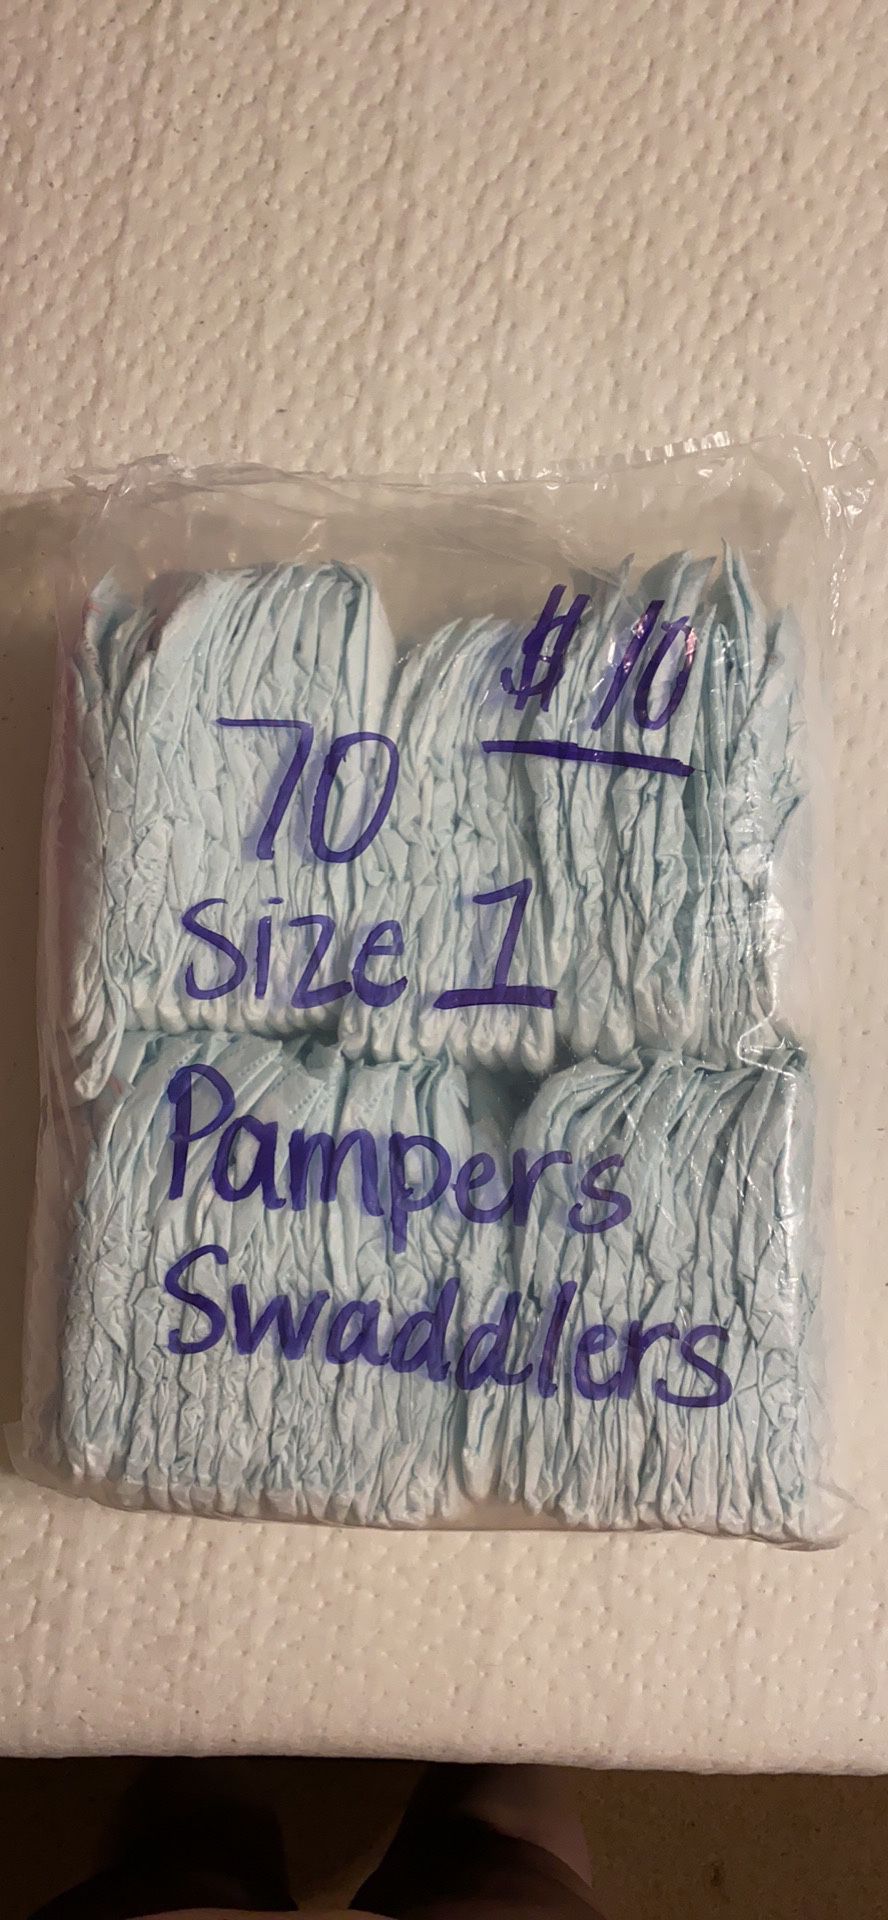 Size 1 Pampers diapers